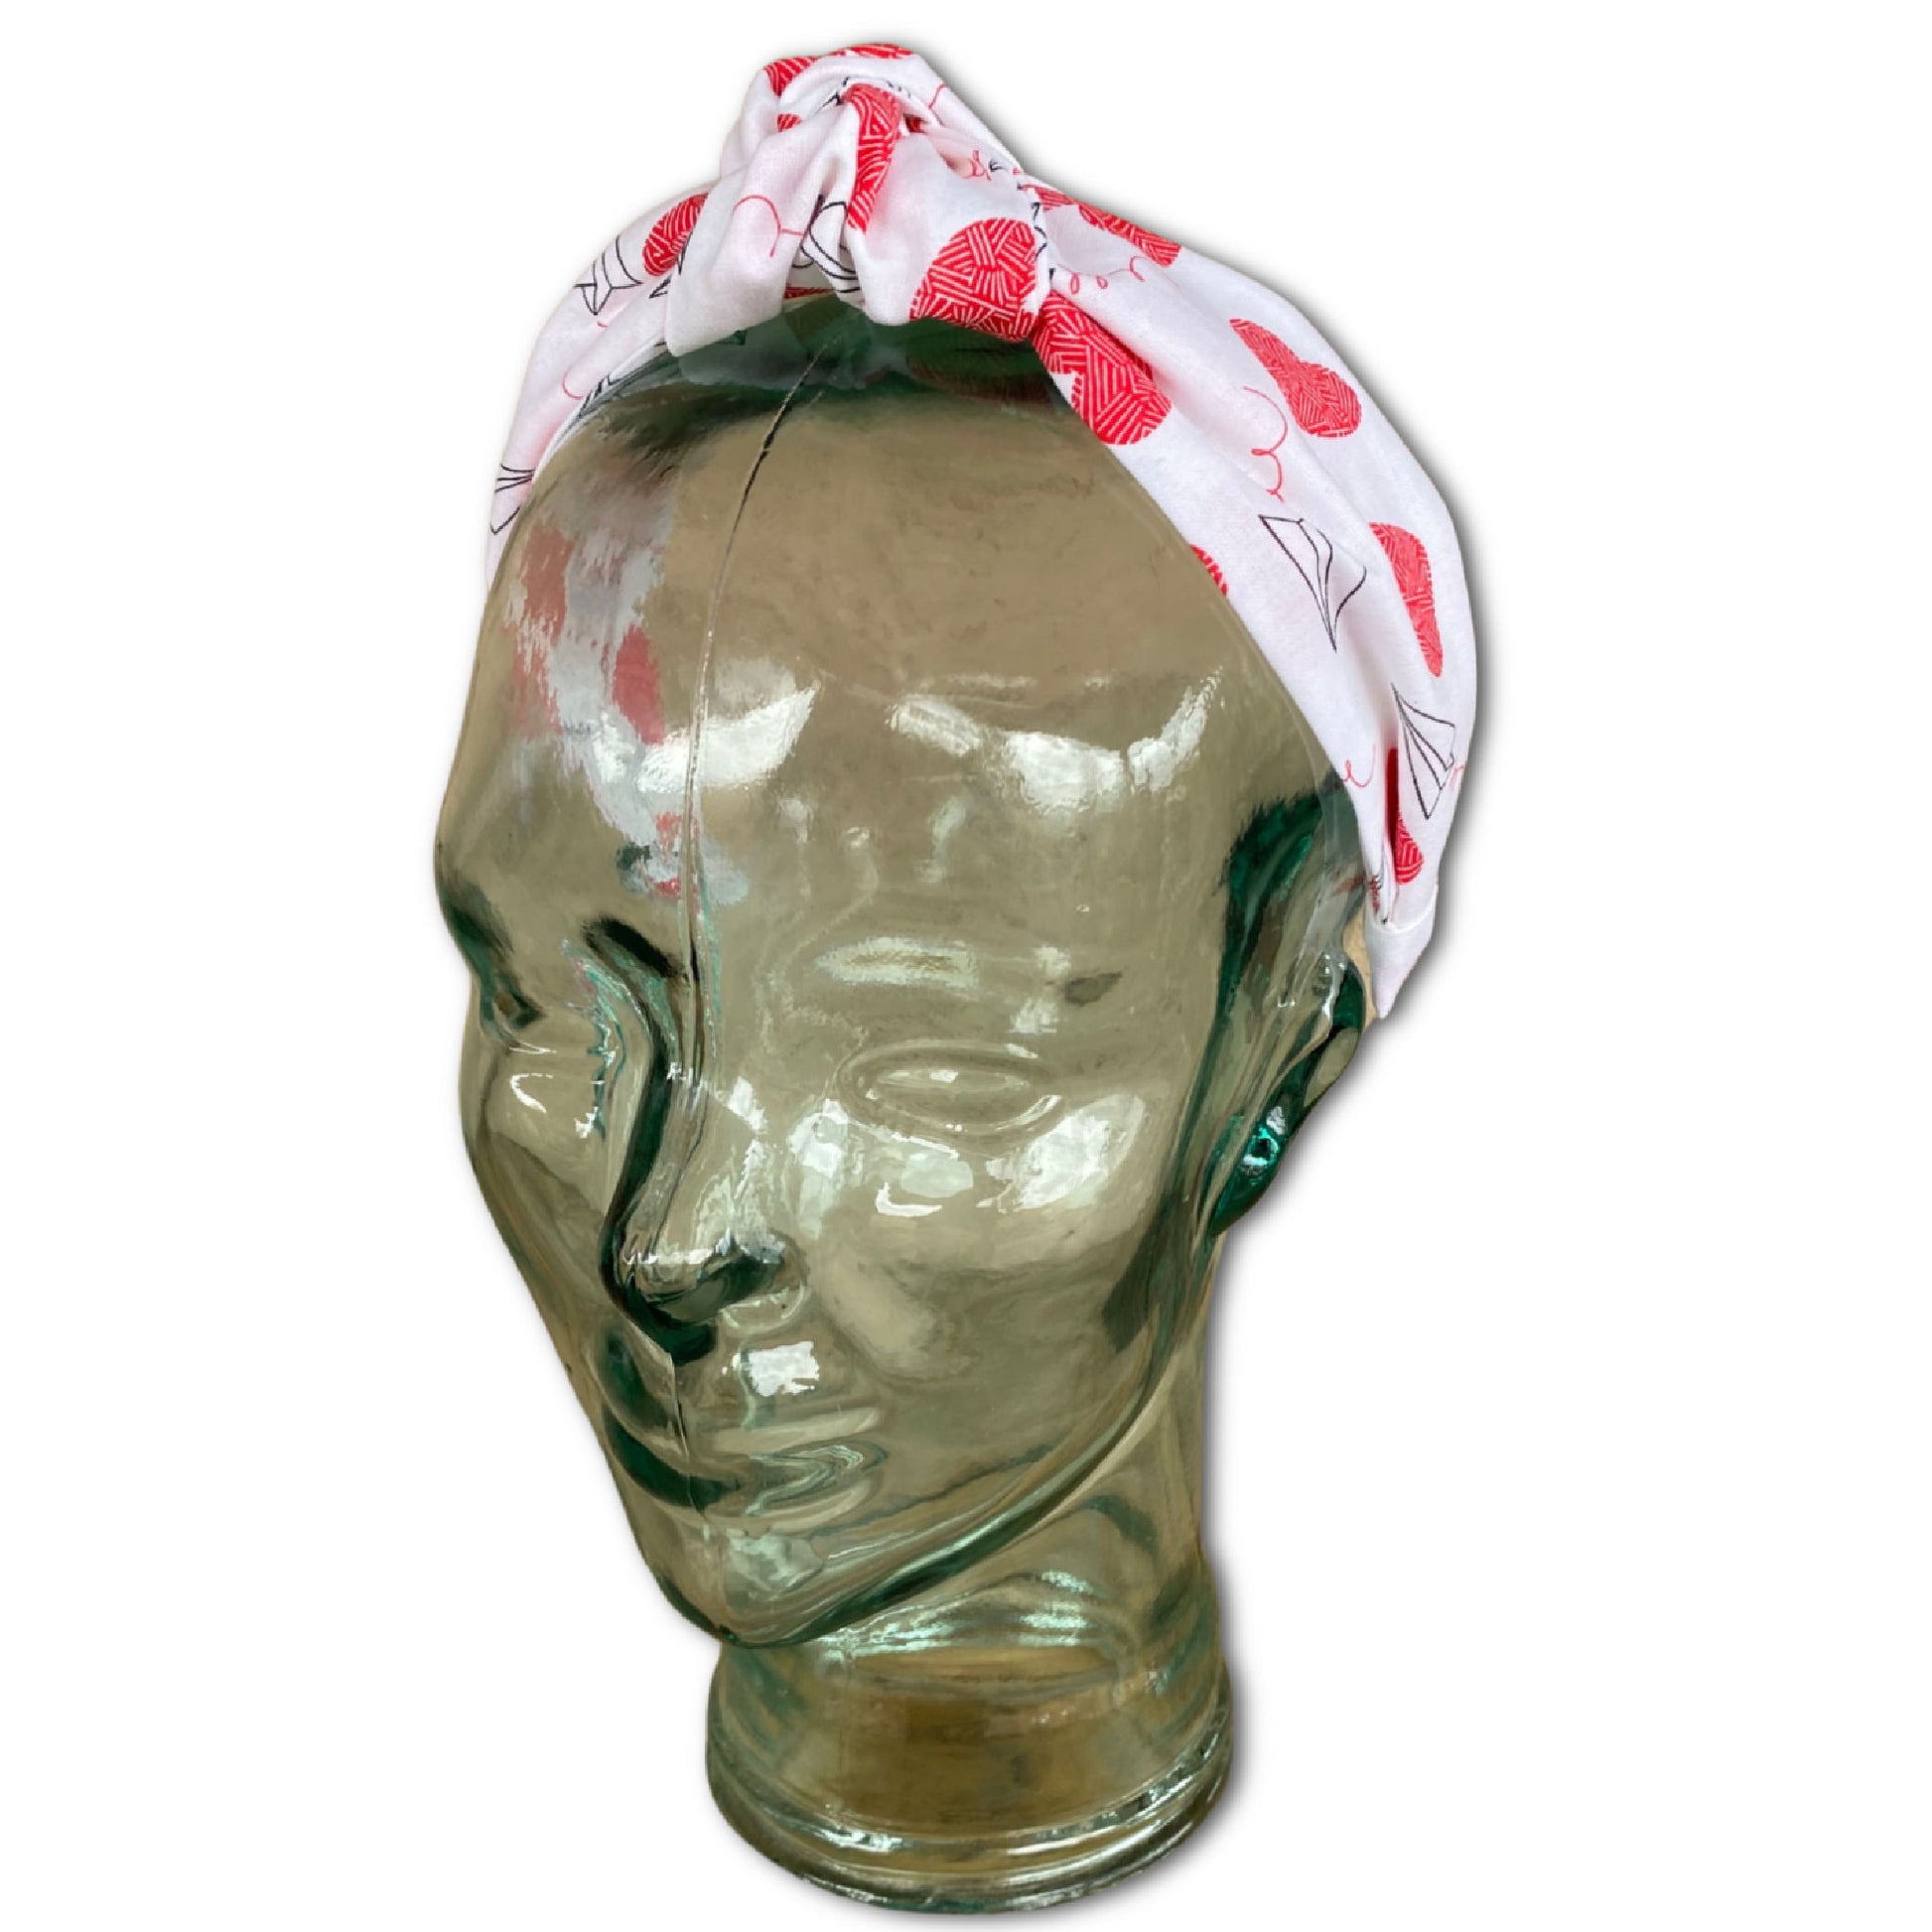 glass head mannequin wearing a valentine themed headband that features large red hearts and paper airplanes